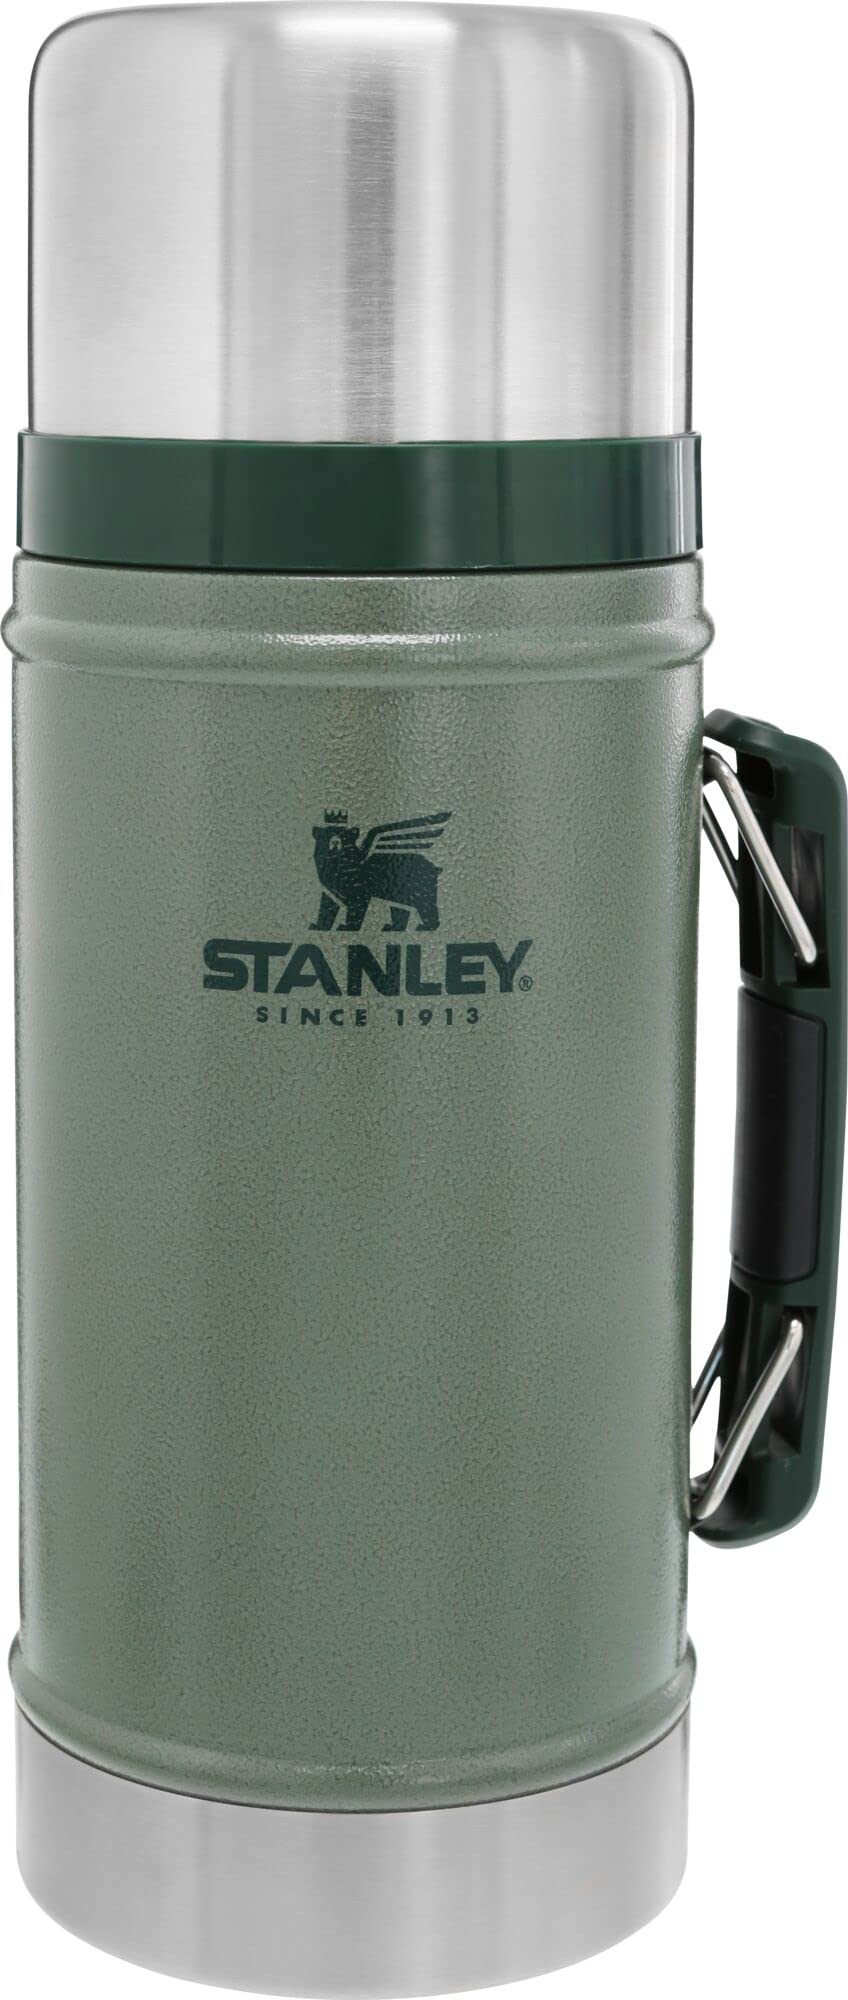 1.0qt Stanley Legendary Classic Vacuum Insulated Food Jar / Thermos (Hammertone Green) $20.47 + Free Ship w/Prime